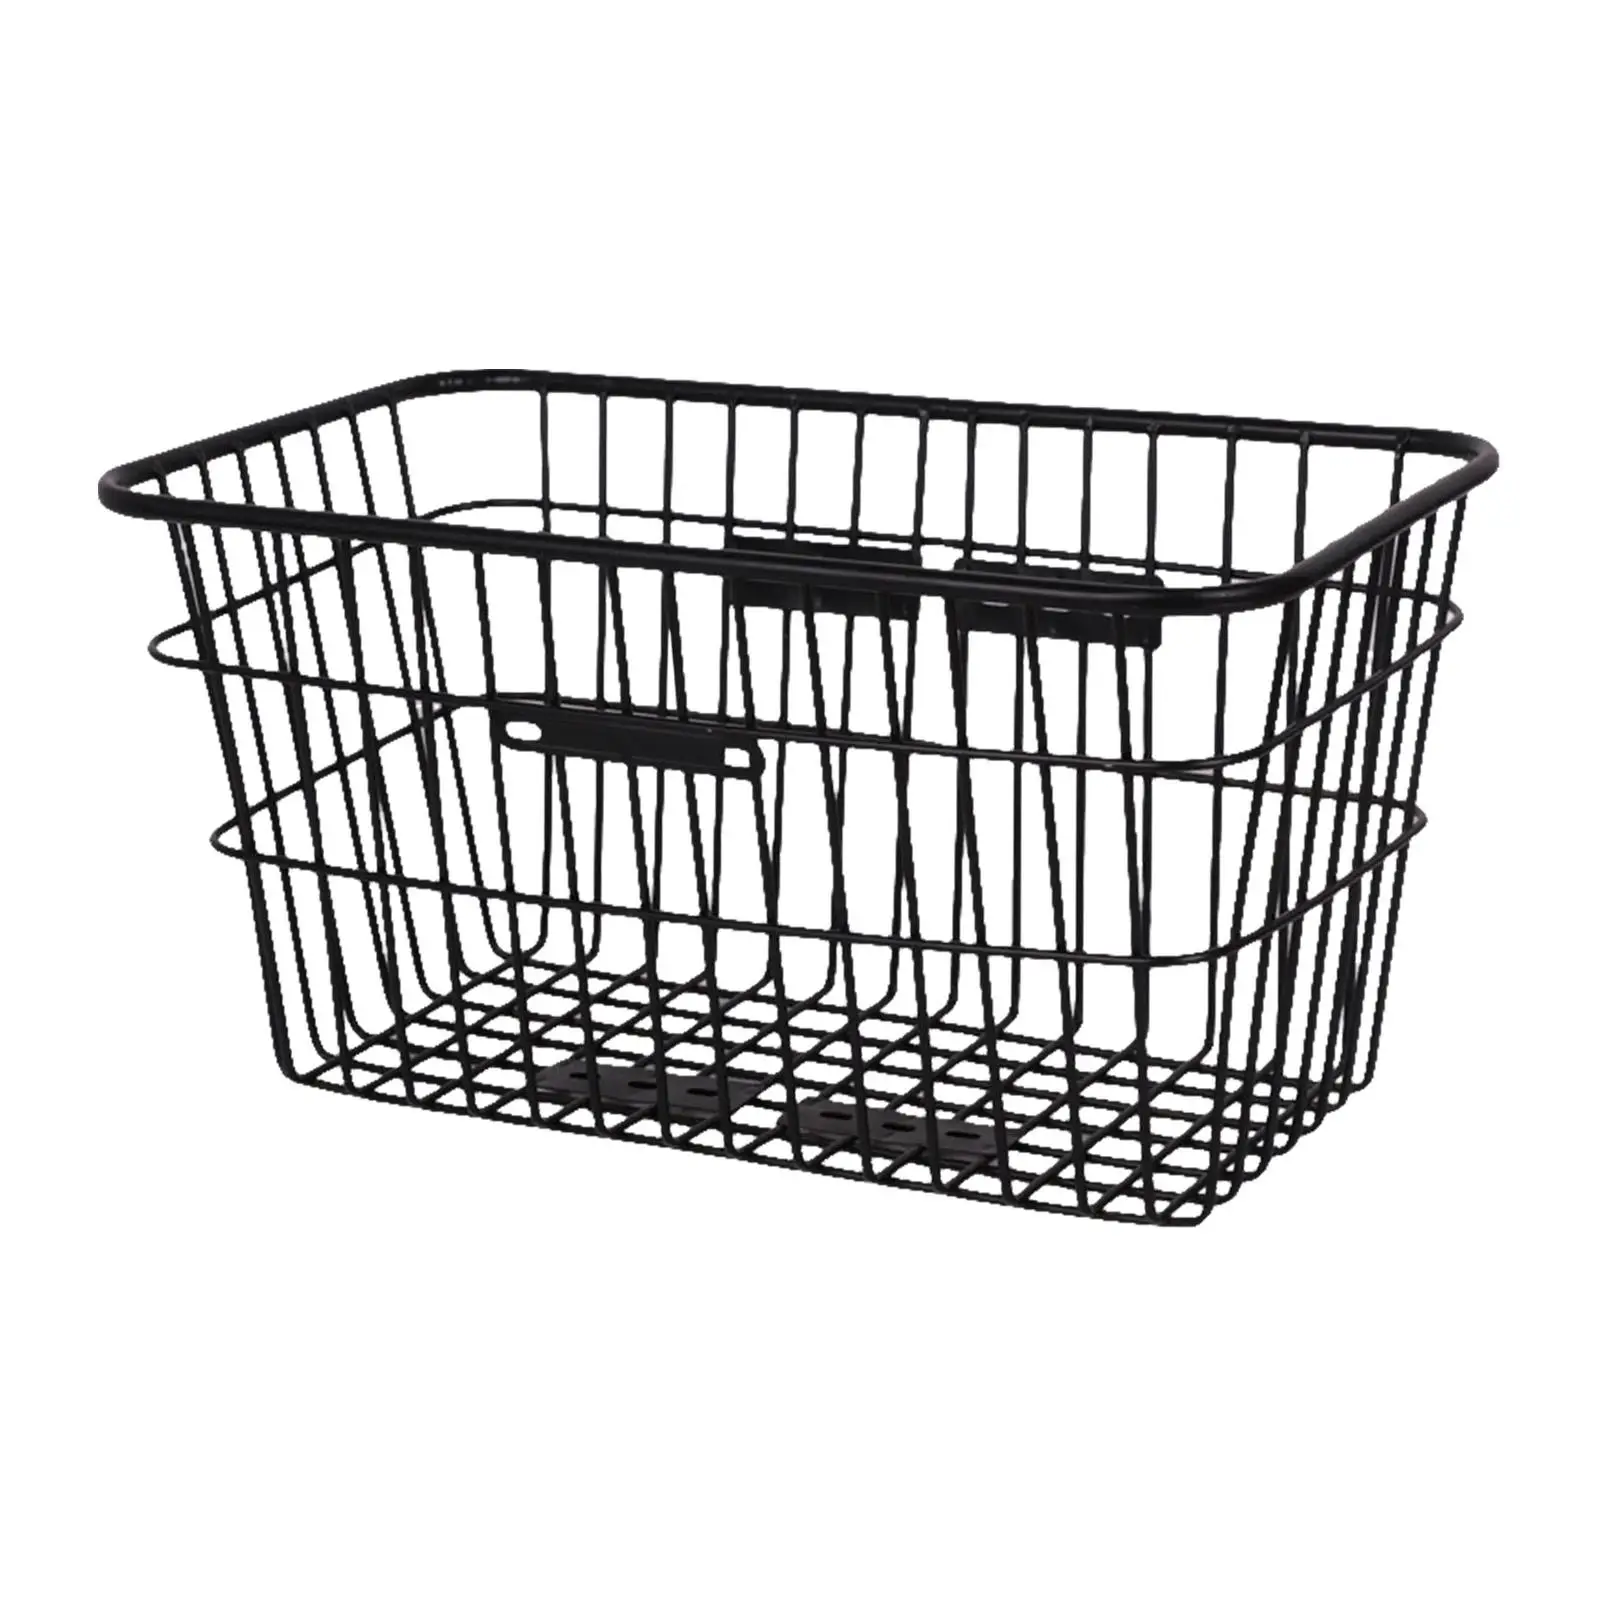 Bike Basket Storage Basket Storage Box Pet Carrier Easy to Install for Camping Shopping and Cycling